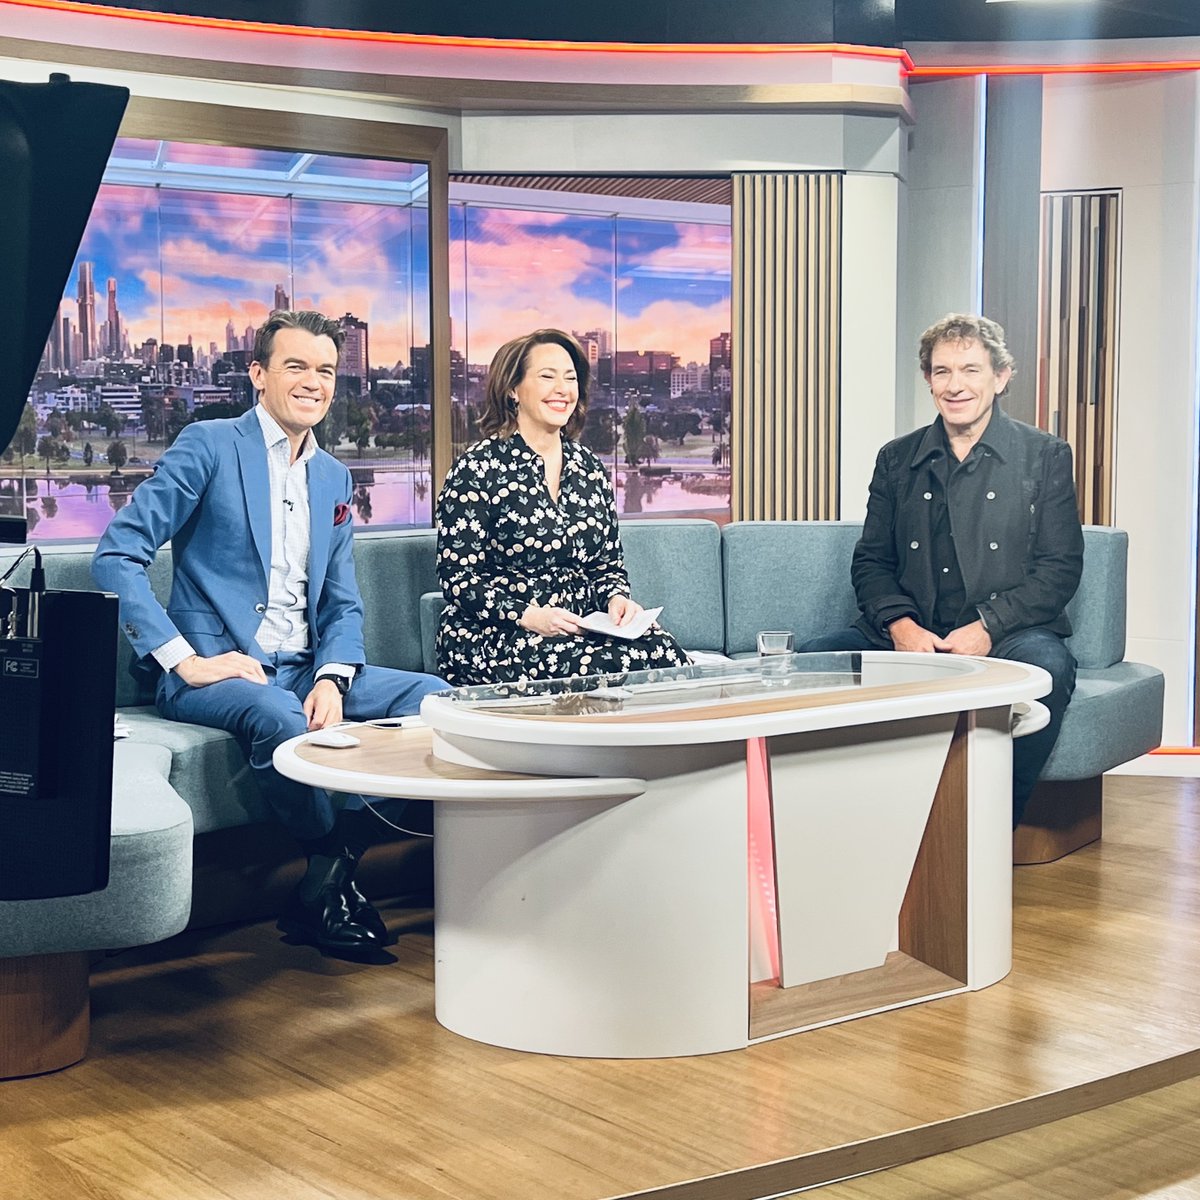 Big thanks to Lisa Millar and @mjrowland68 and the full team at @BreakfastNewsNews for the chat this morning about the new album 'Rivers Run Dry', out this Friday July 21, and Ian's tour. We love our ABC! Album and tour details at ianmoss.com.au #ianmoss #riversrundry